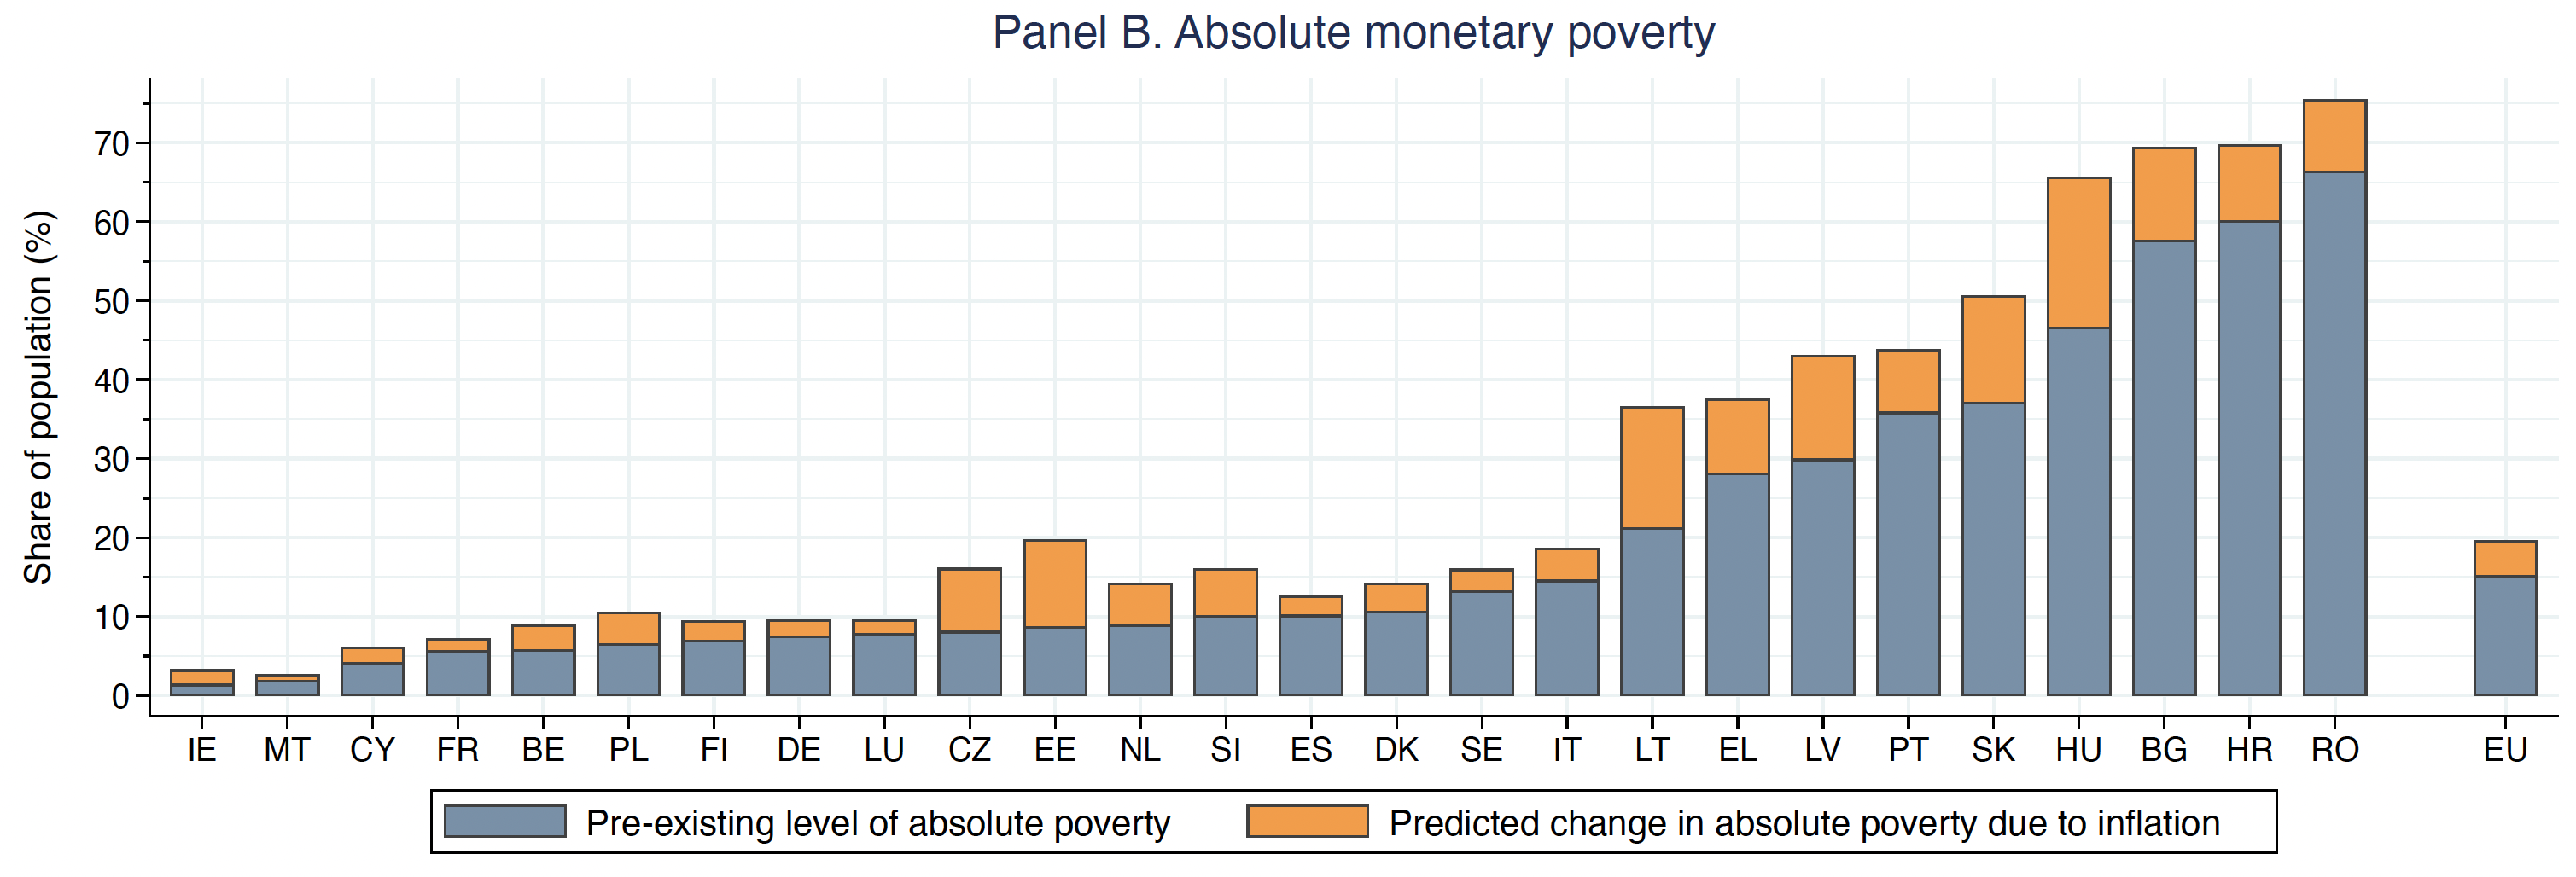 Figure 2b The predicted effects of inflation on absolute monetary poverty across the EU